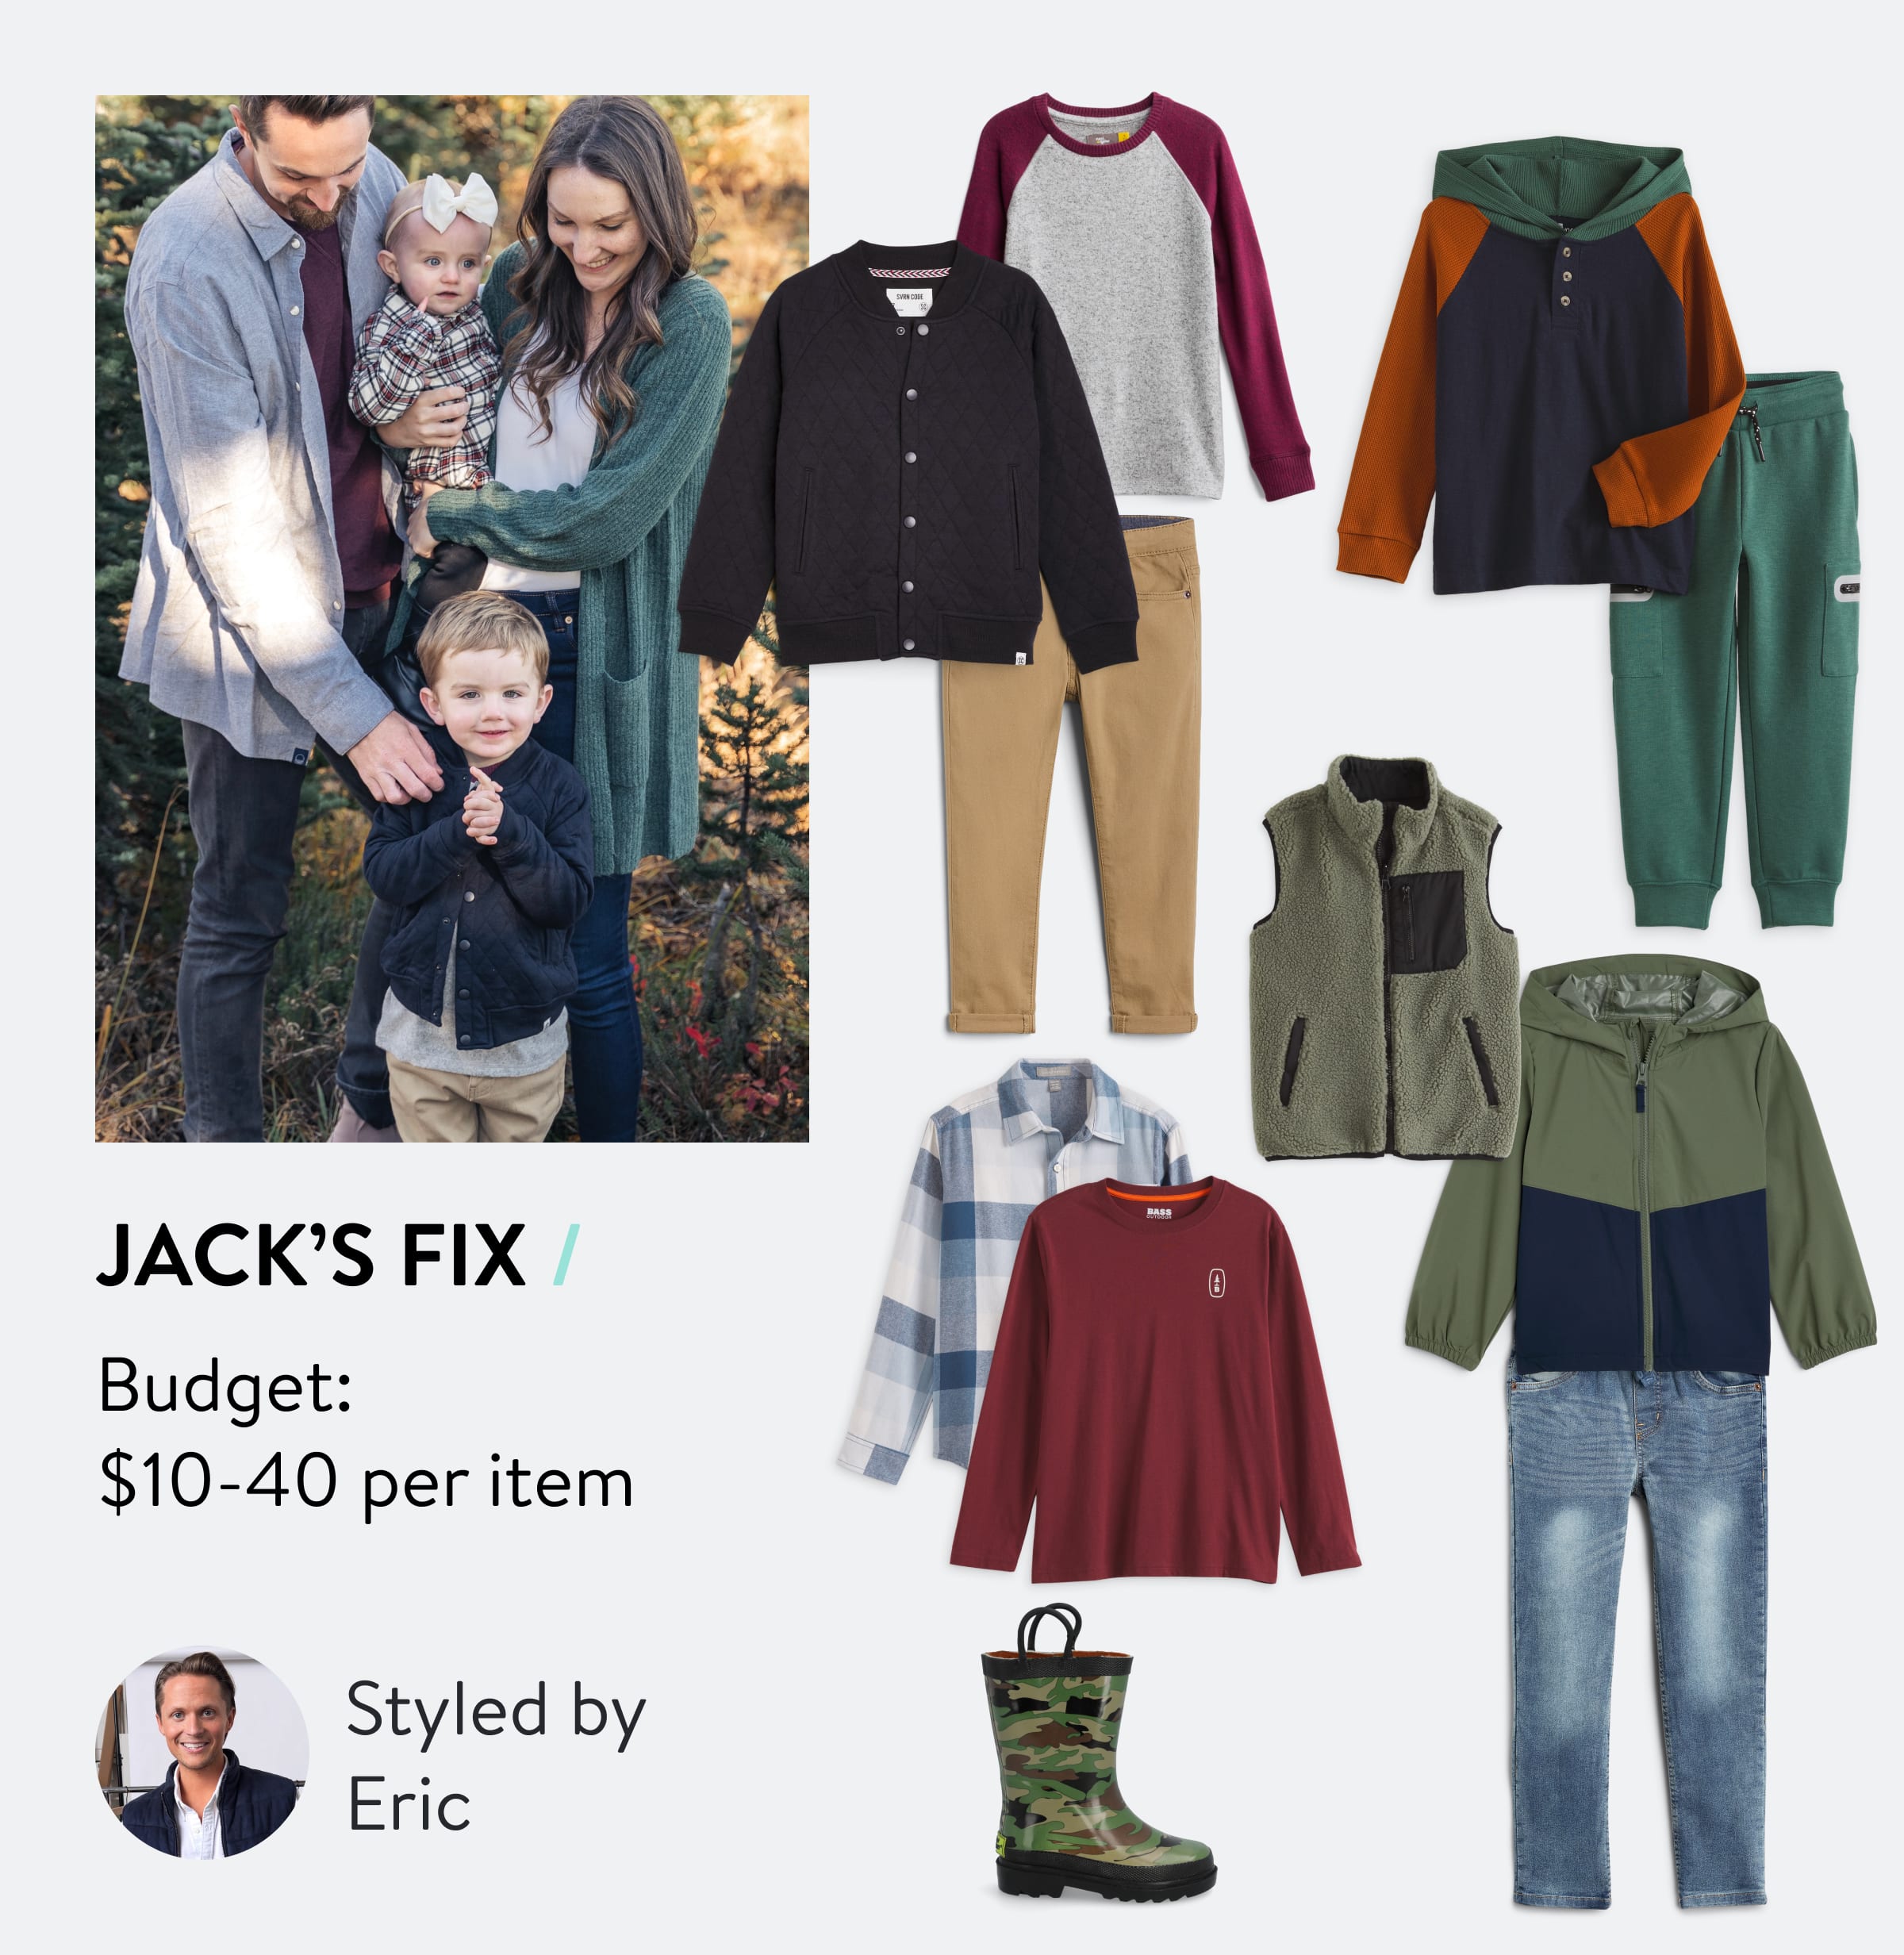 Jack’s Fix. Budget: $10-40 per item. Styled by Eric. Family holding baby and young boy all in Stitch Fix clothing. Kids Fix box contents including quilted jacket, long-sleeve t-shirt, colorblock hoodie, green sweatpants, fleece vest, windbreaker, jeans, flannel shirt and camo rubber rain boots. Stitch Fix Stylist wearing a vest and white oxford button-down shirt